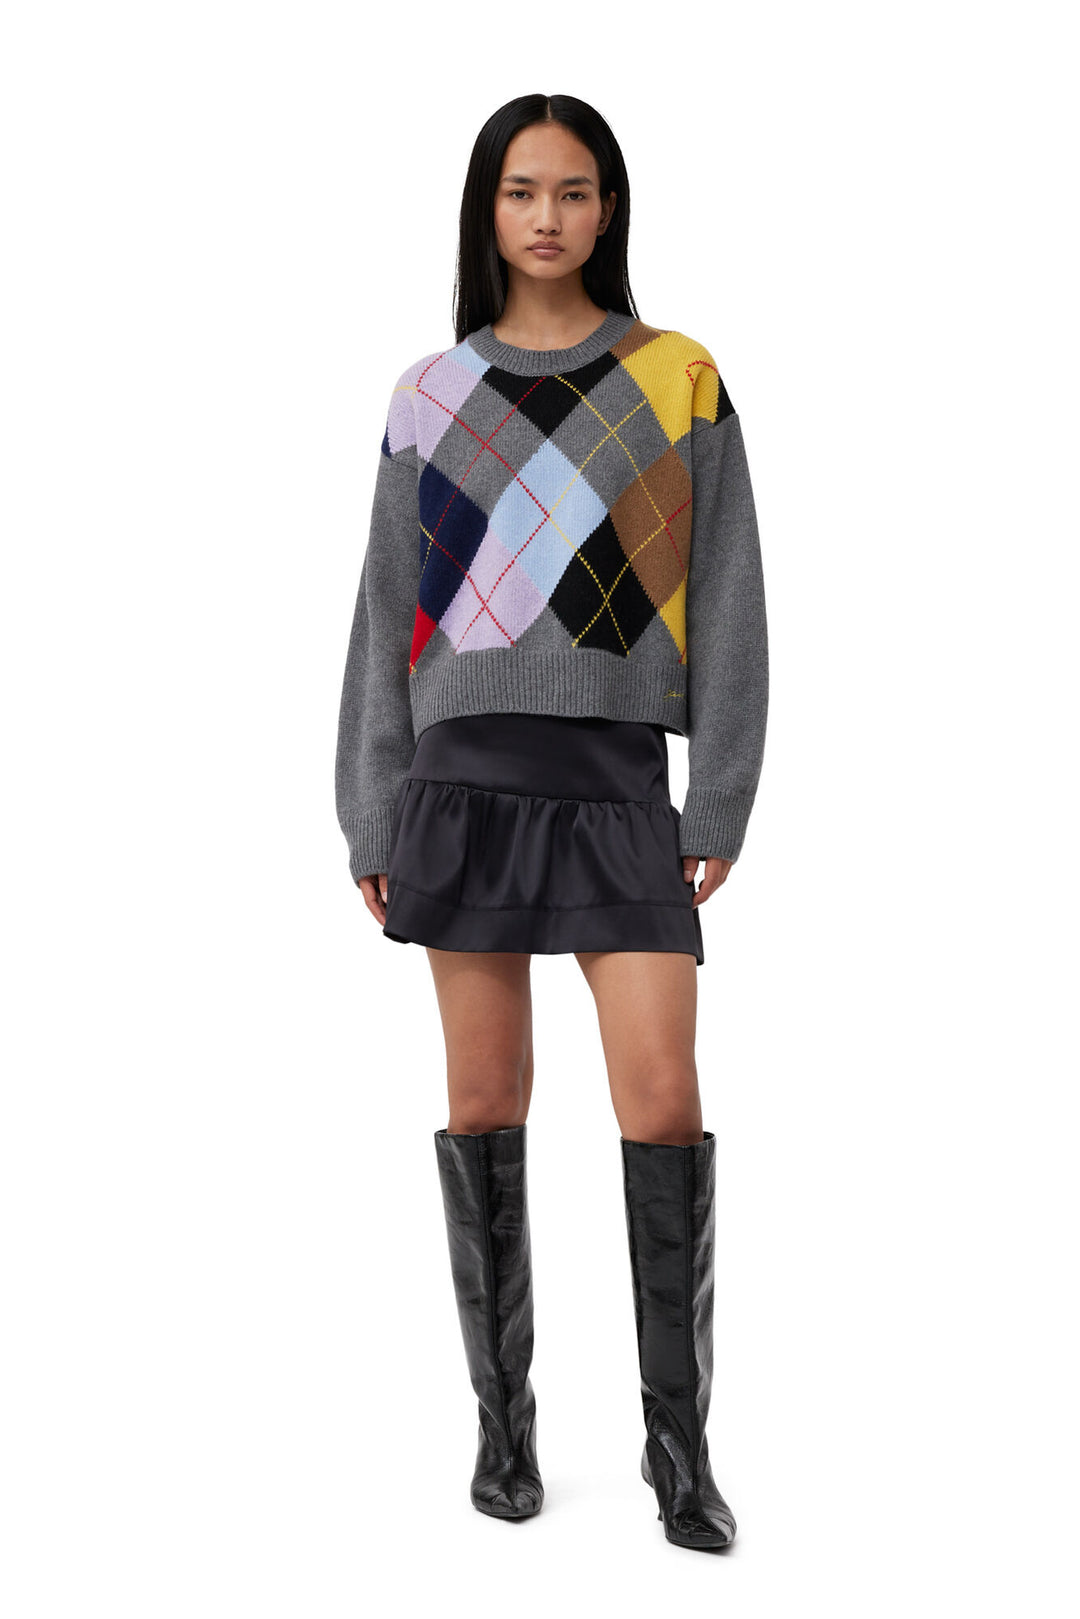 Harlequin Wool Mix Oversized O-Neck Pullover - Frost Gray